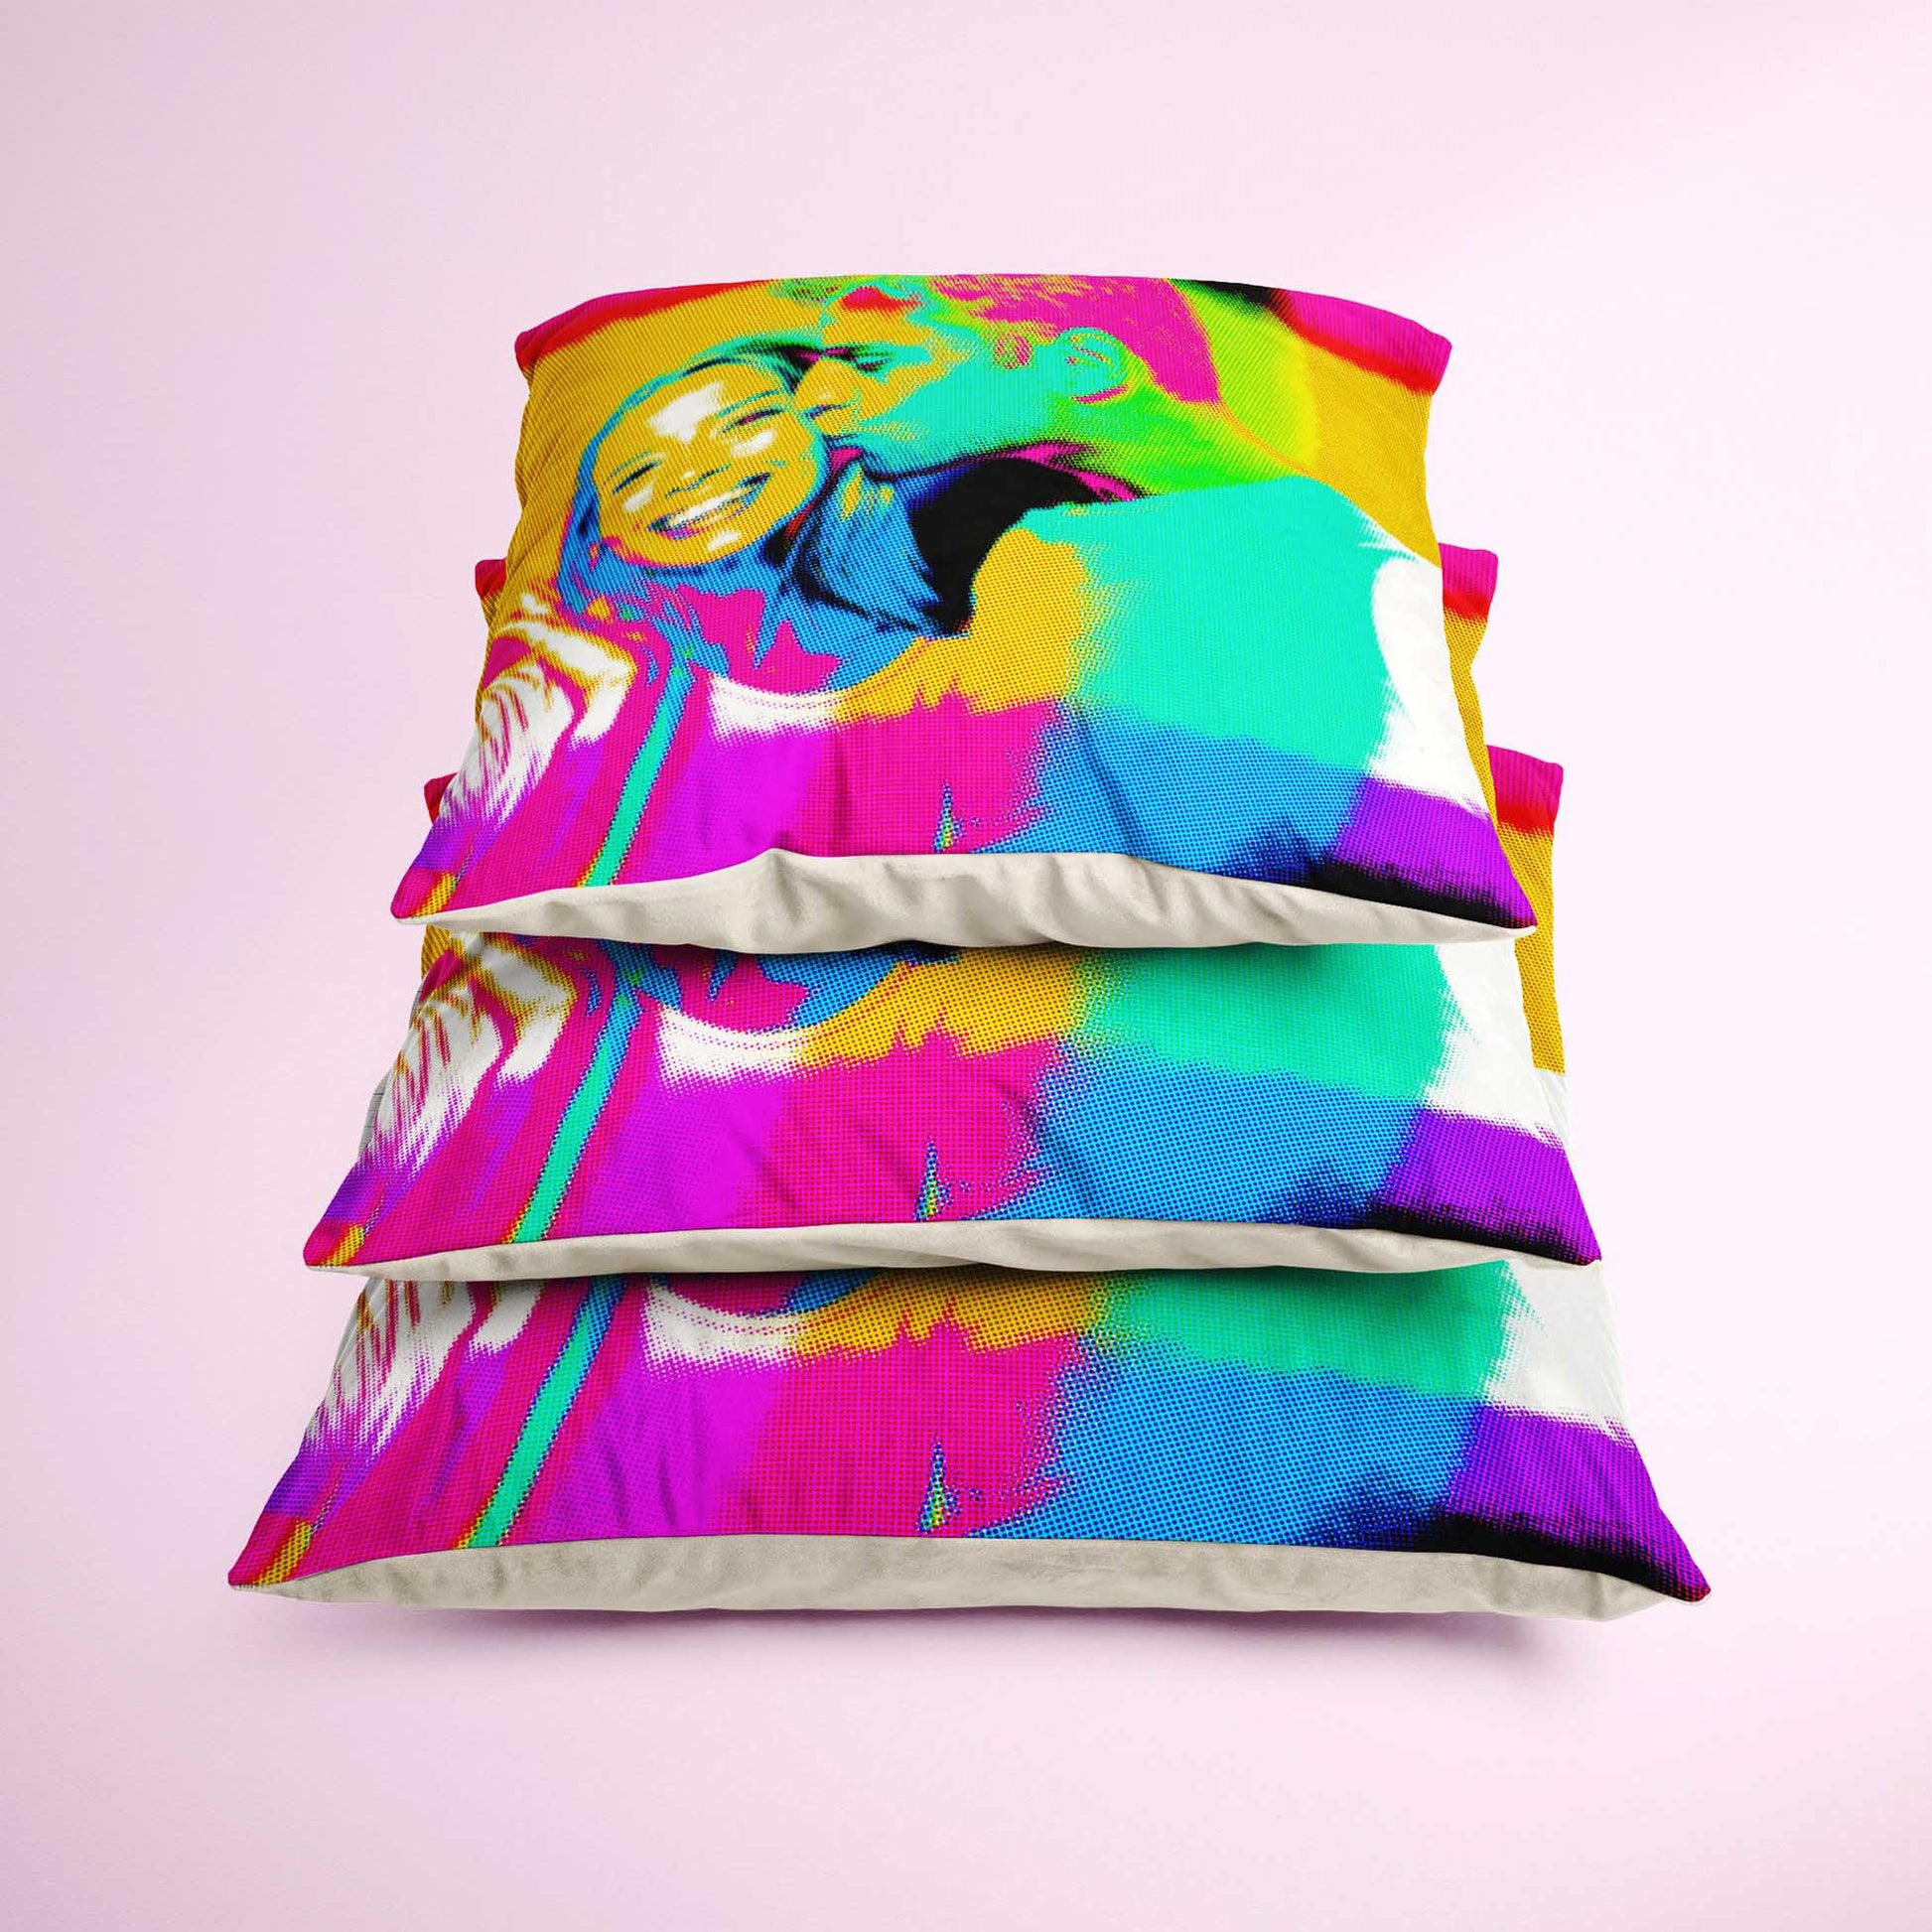 Infuse your home with creativity and imagination with the Personalised Pop Art Cushion. Printed from your photo, it features a unique and quirky design that adds a cool and original touch to your interior decor. Handmade with soft velvet